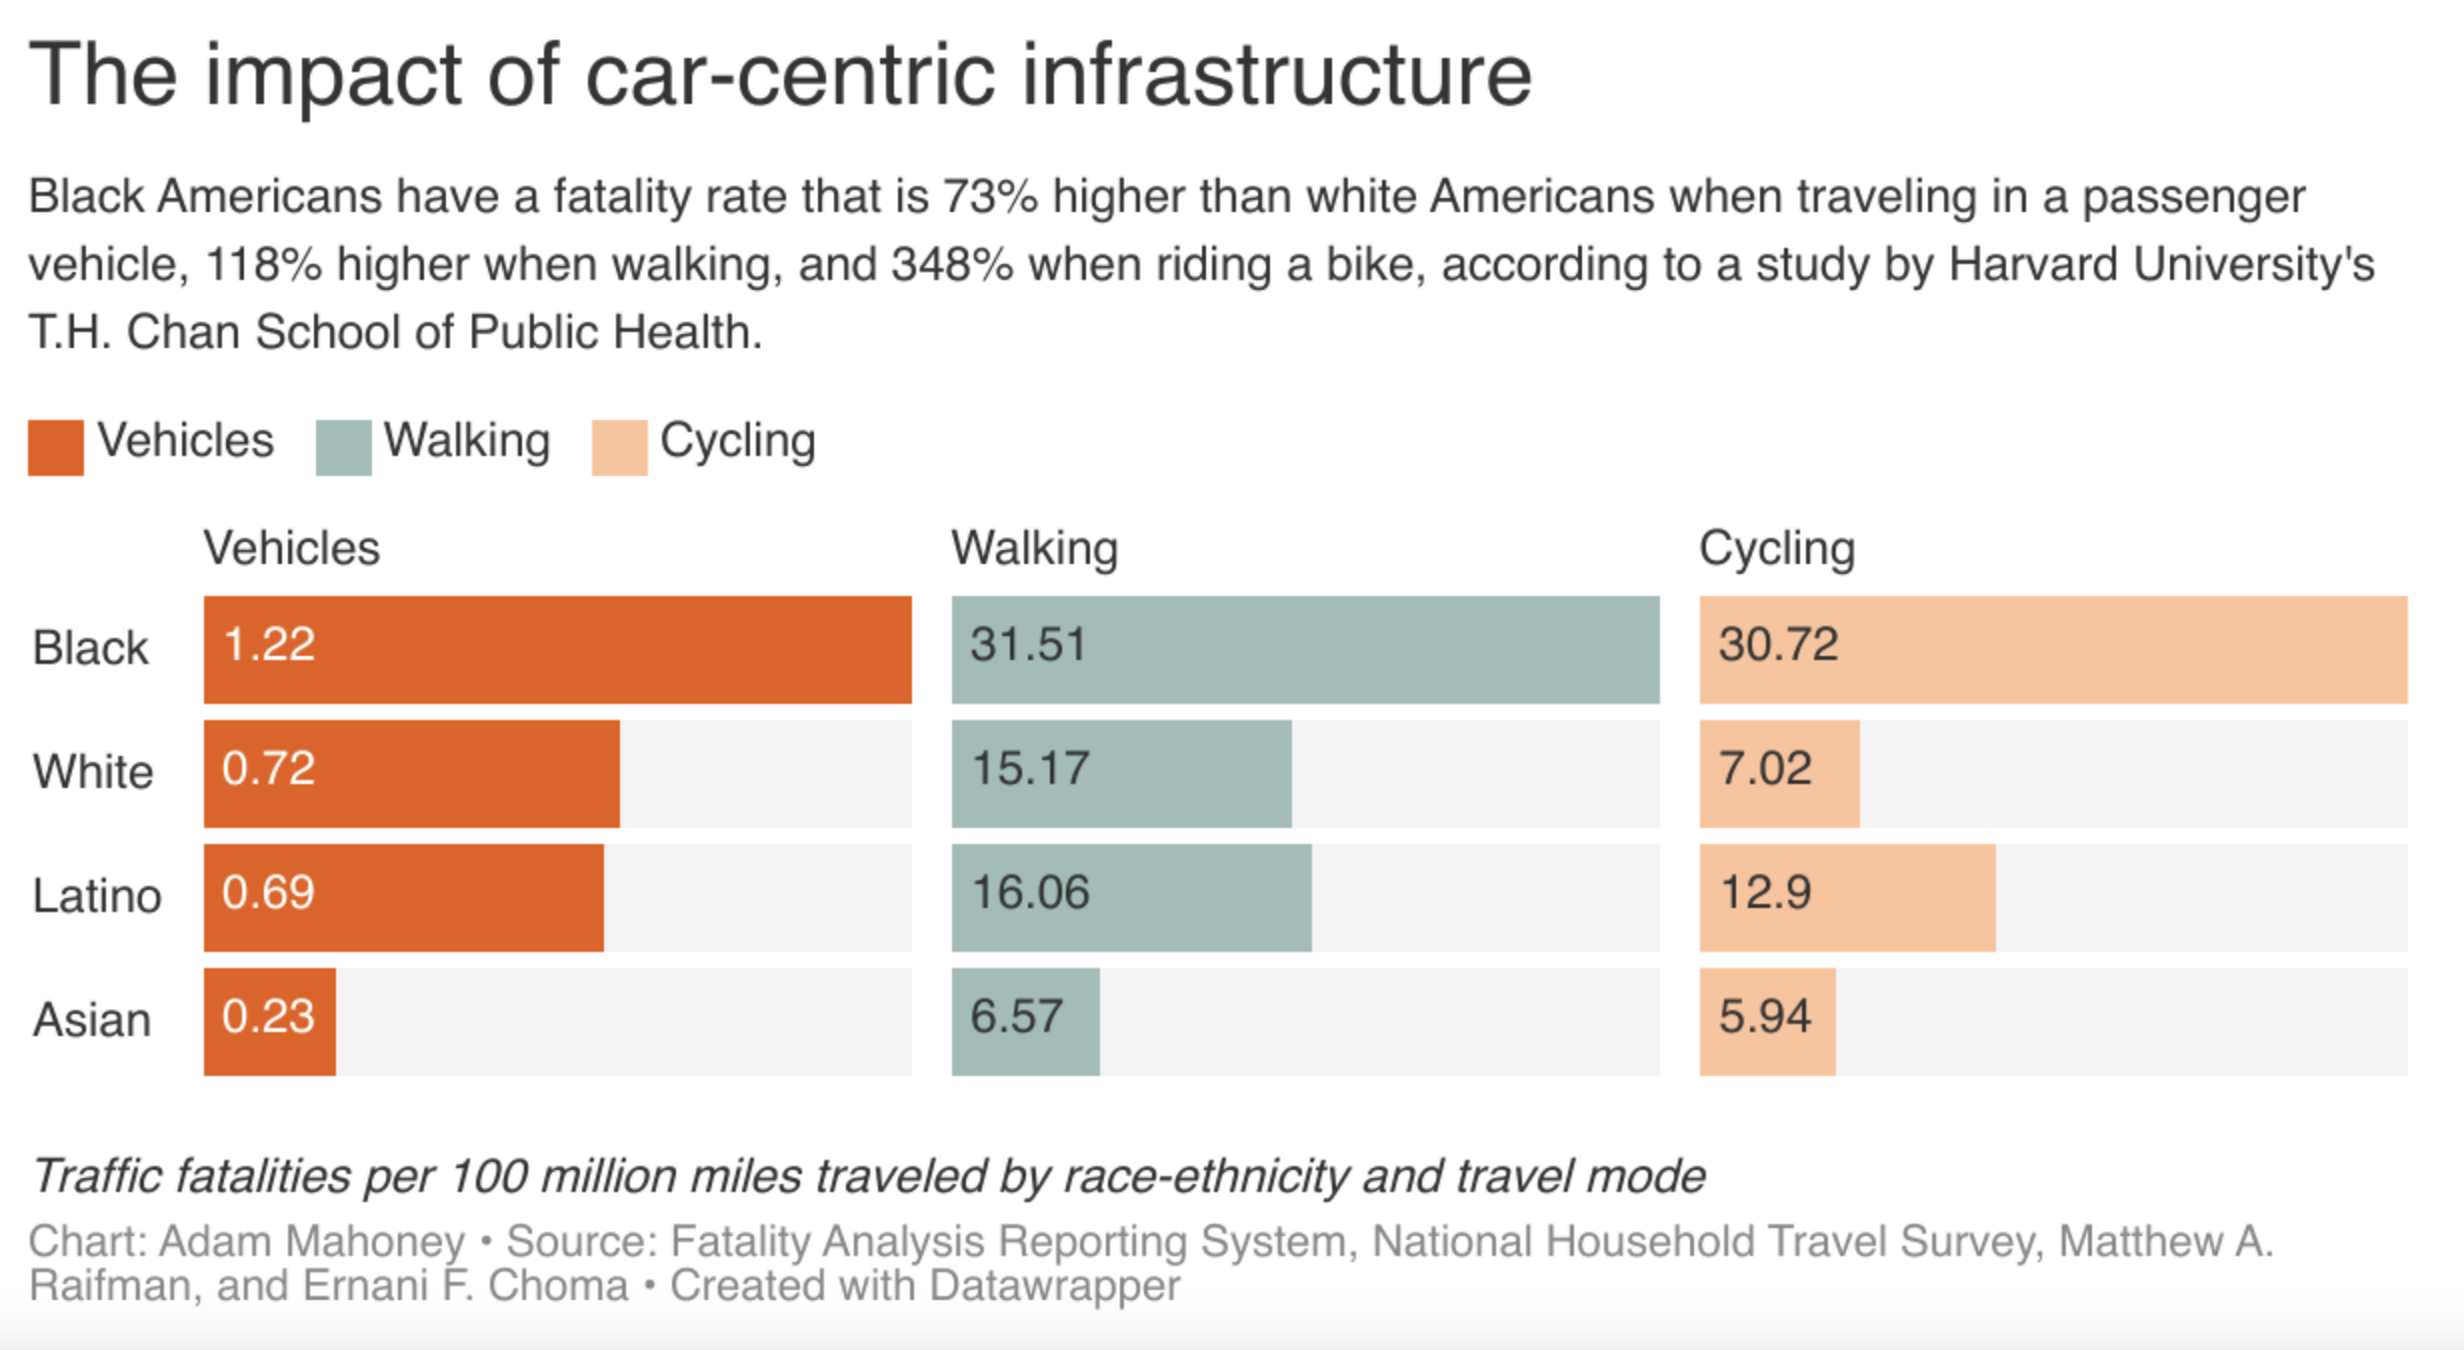 A bar chart showing fatality rates for walking, biking, and in vehicles by race.